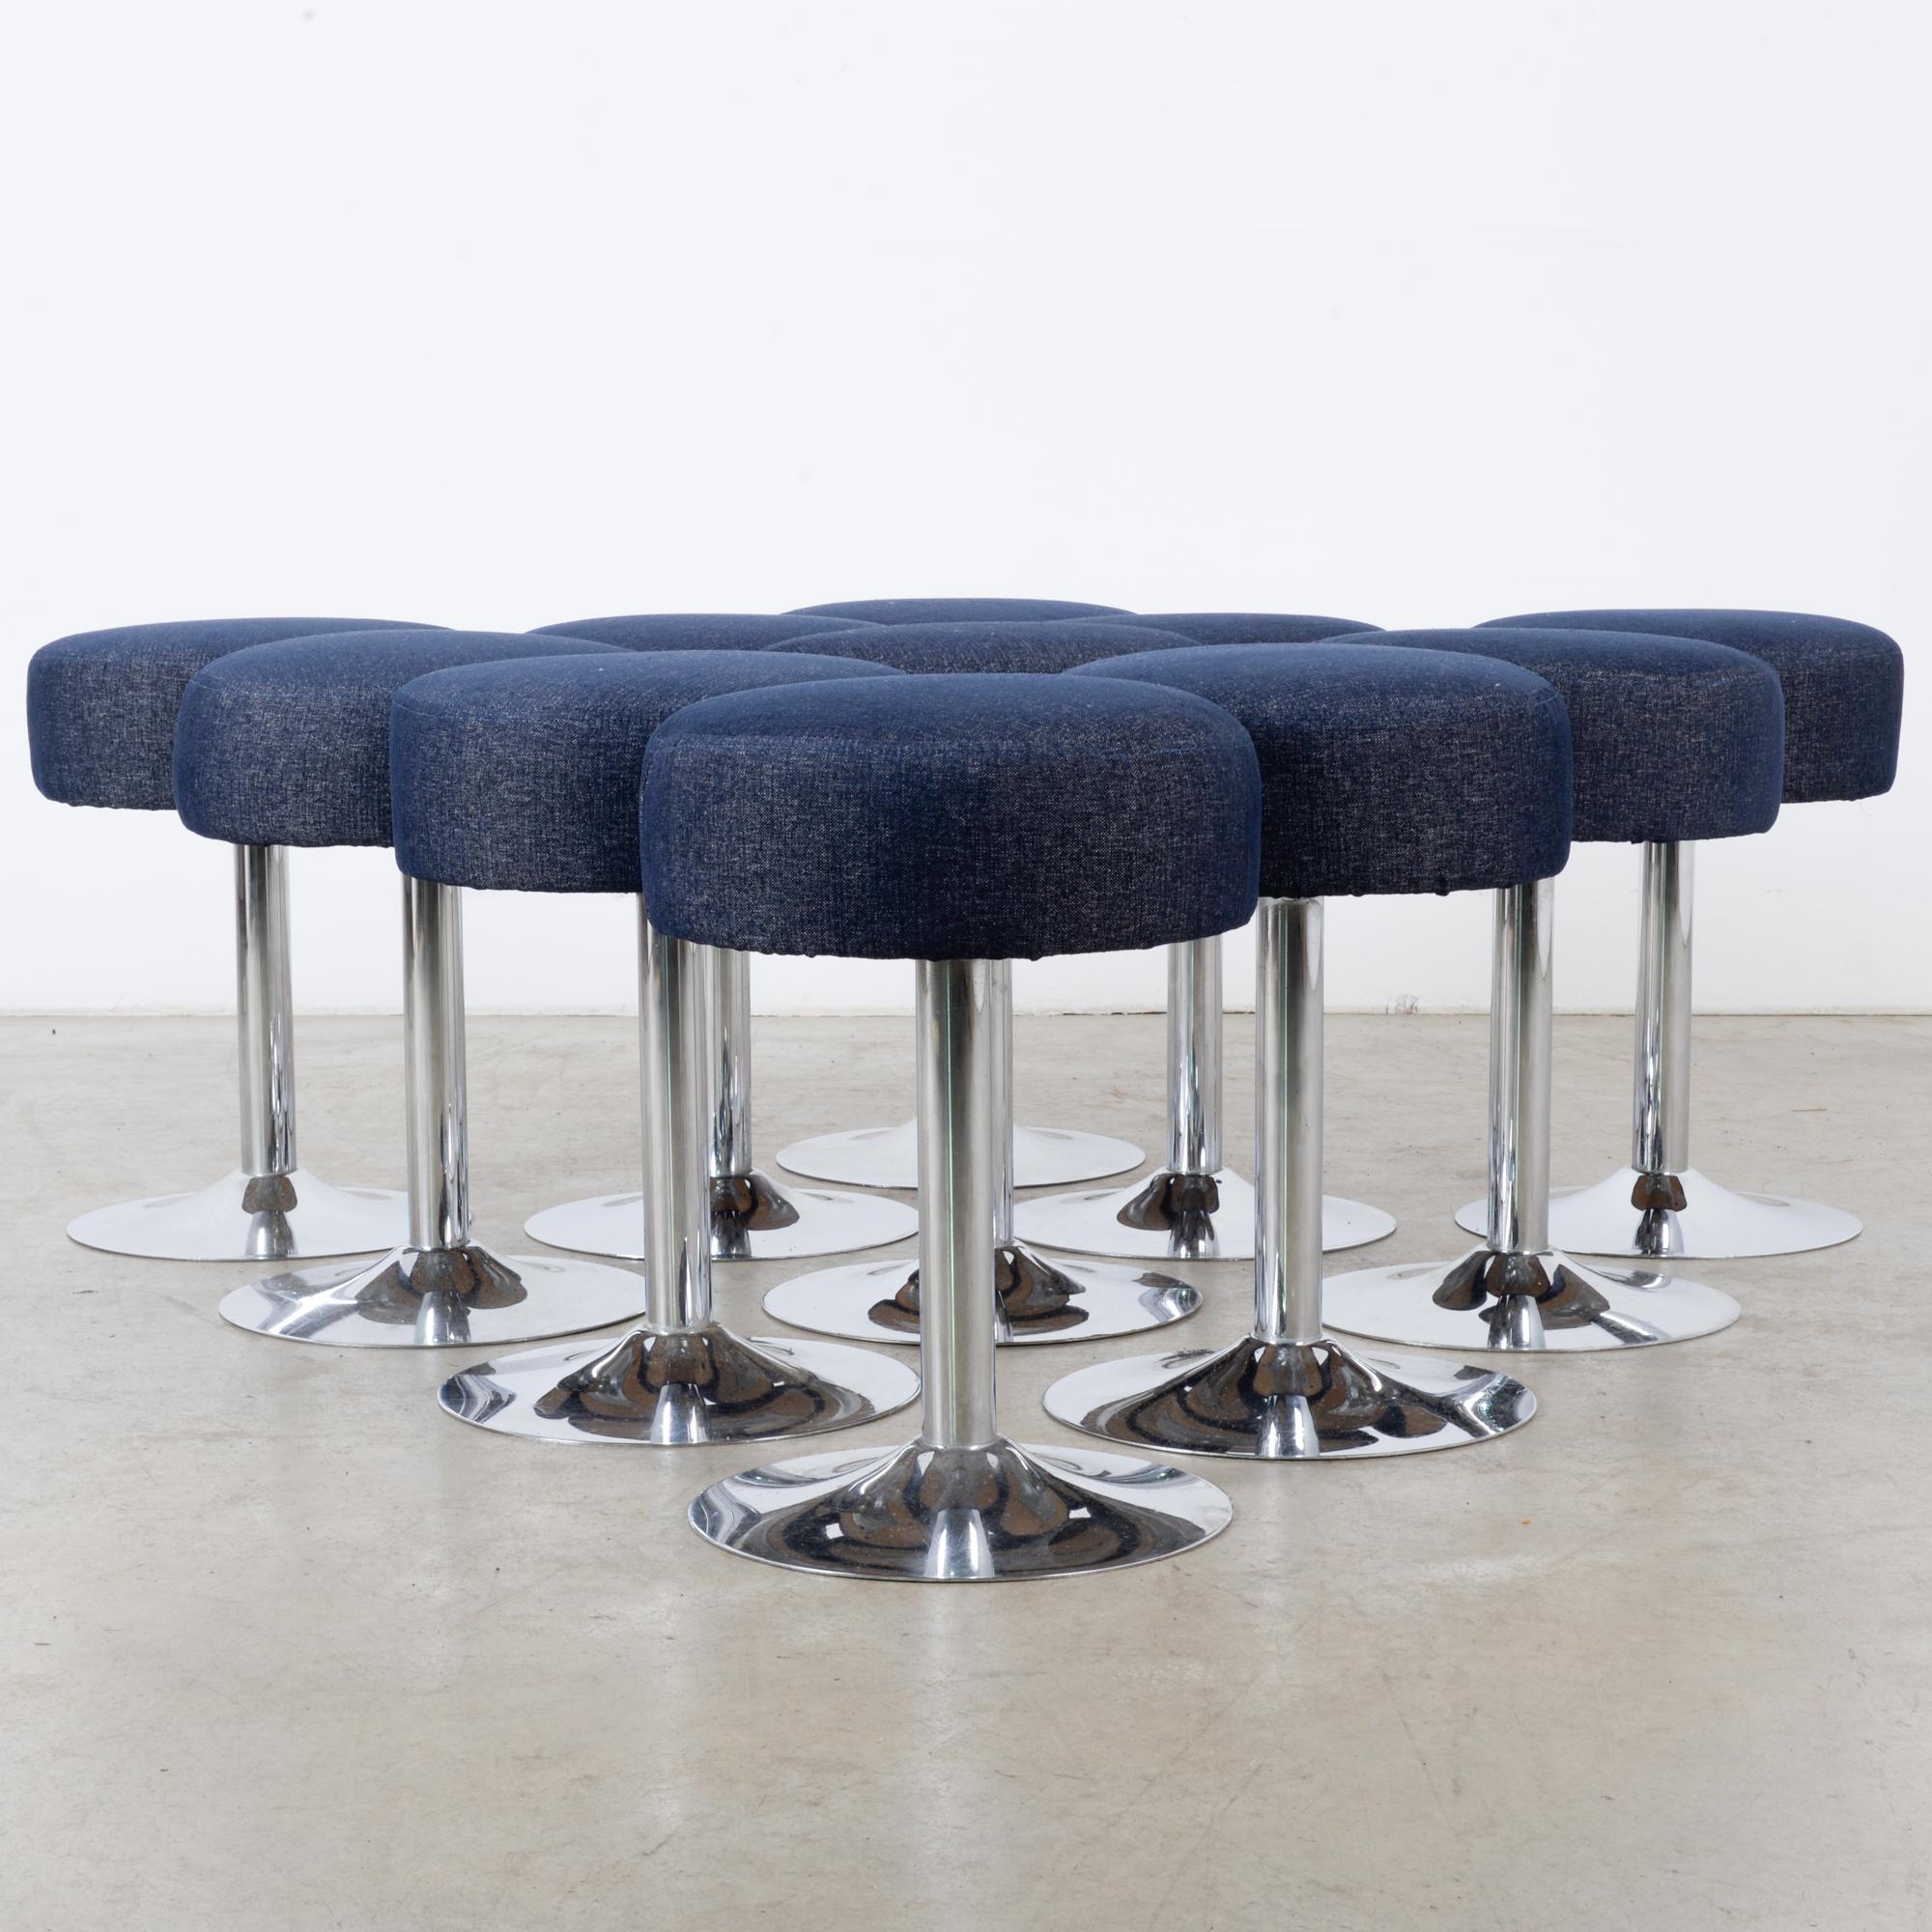 A set of eleven metal stools with upholstered seats from France, circa 1960. Pedestals of bright reflective metal support circular seats, upholstered in an indigo blue. The clean lines are suggestive of Space Age design. The deep color creates an